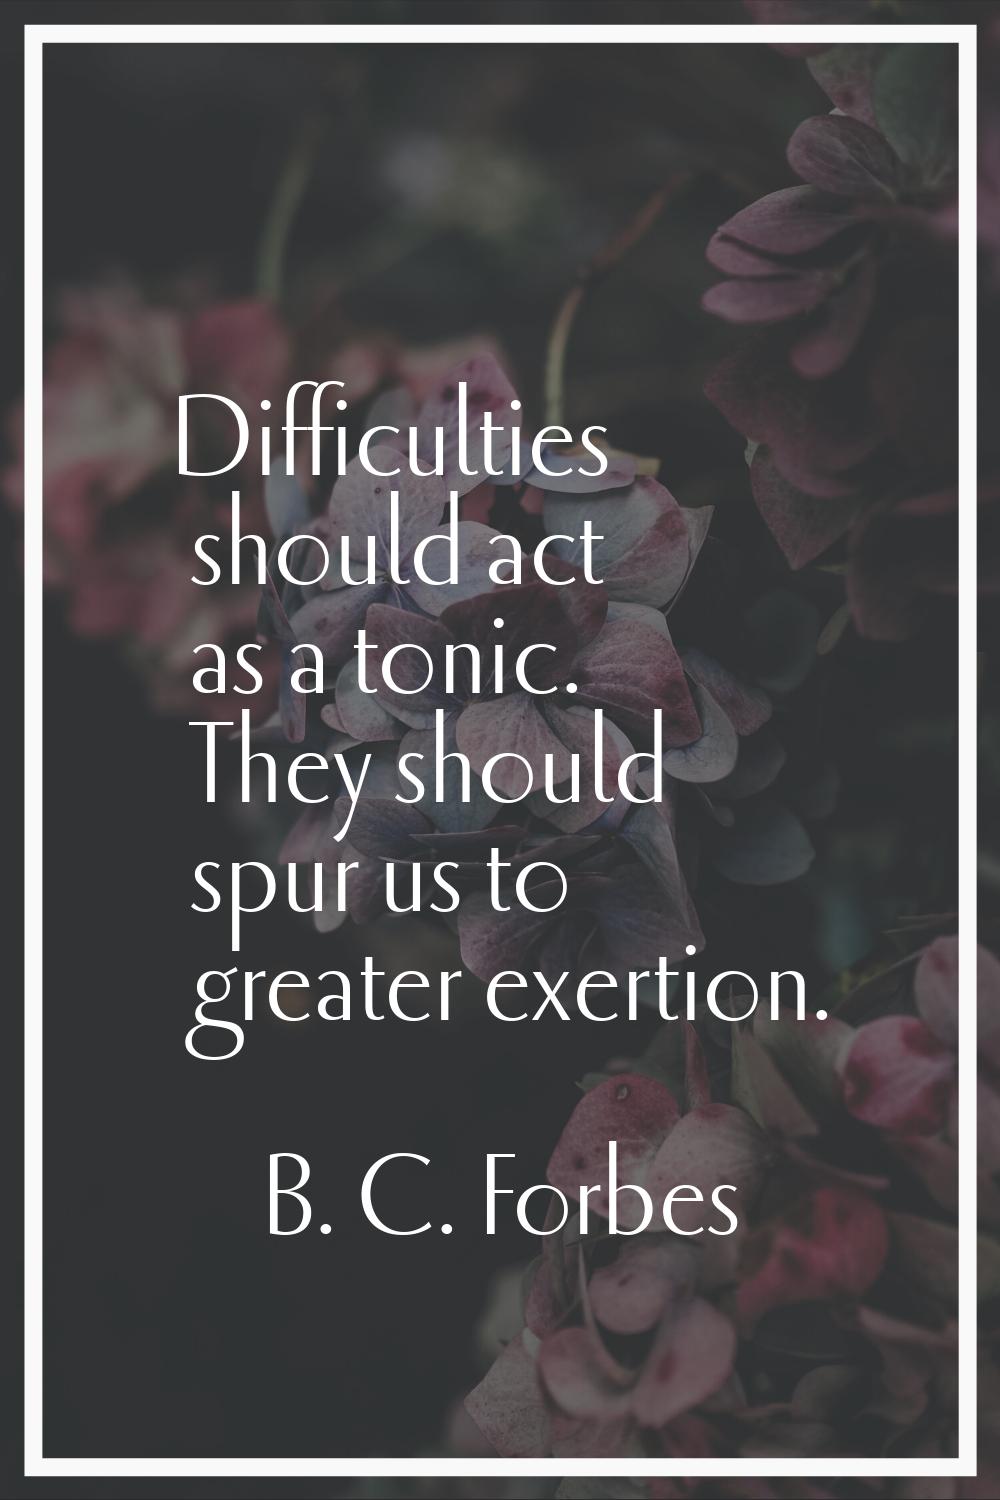 Difficulties should act as a tonic. They should spur us to greater exertion.